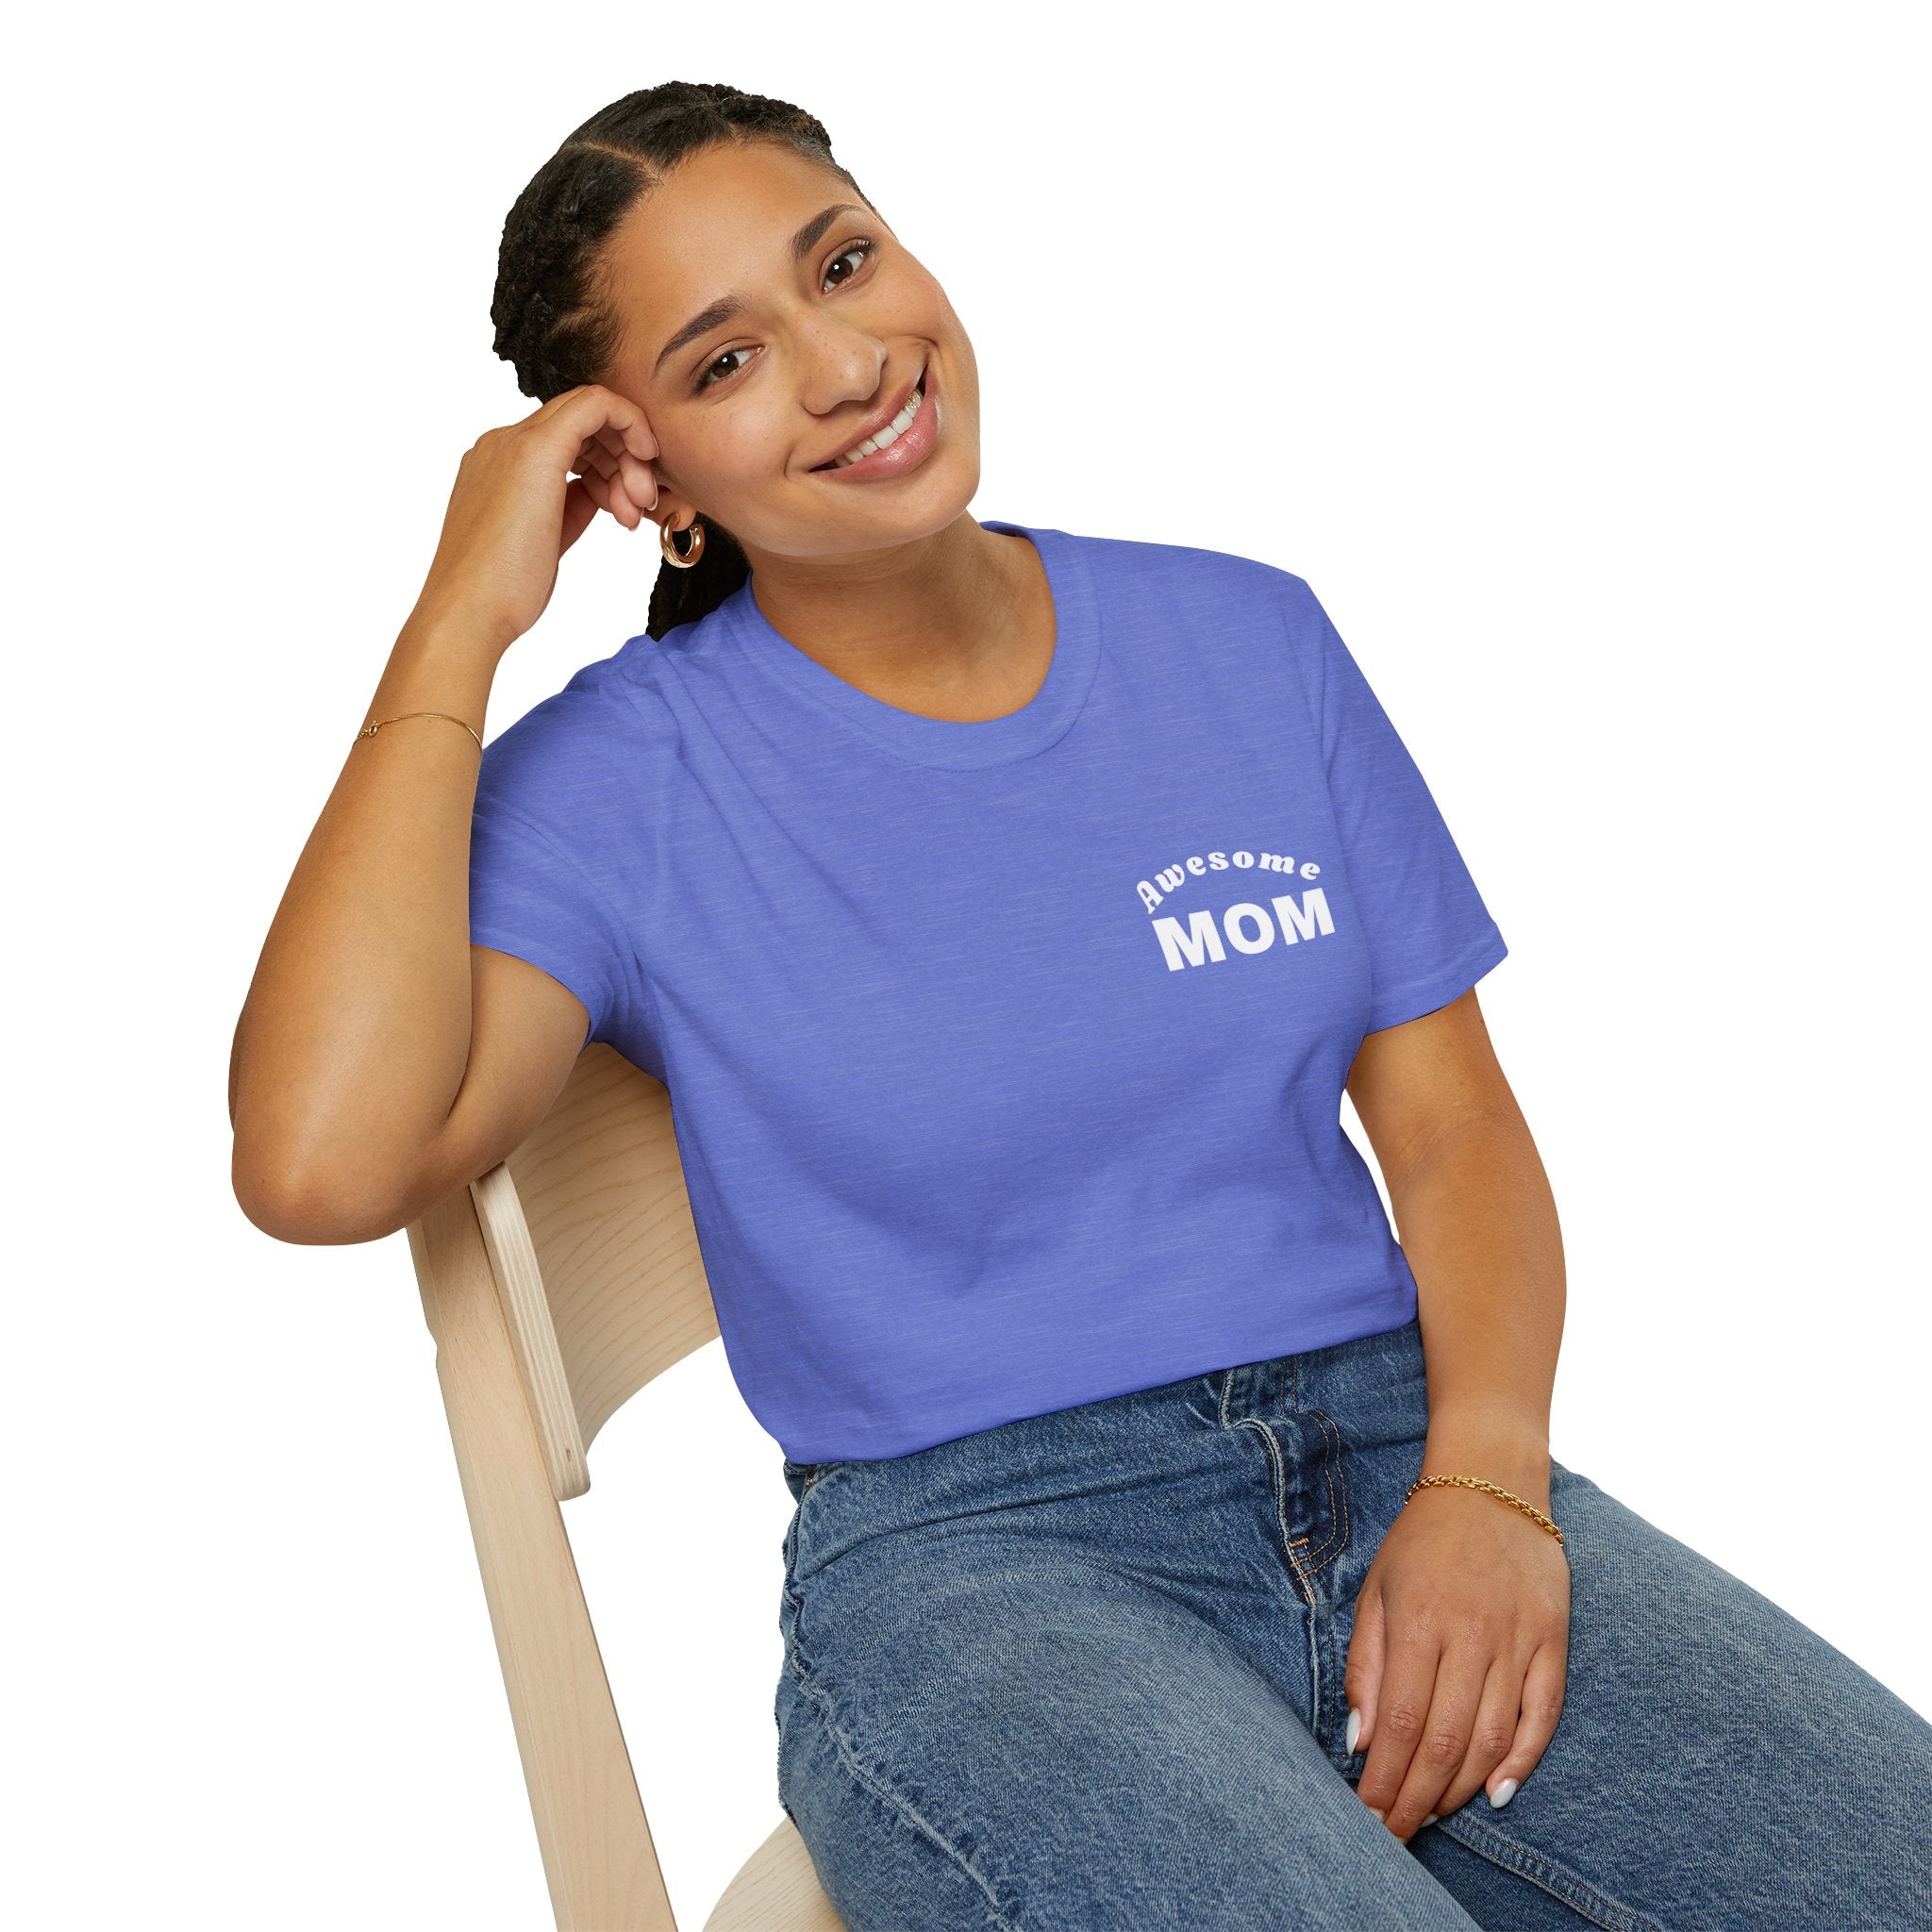 Awesome Mom Unisex Softstyle Crew Neck T-Shirt, Mother's Day Gift, Gift for Mom, Mom's Shirt